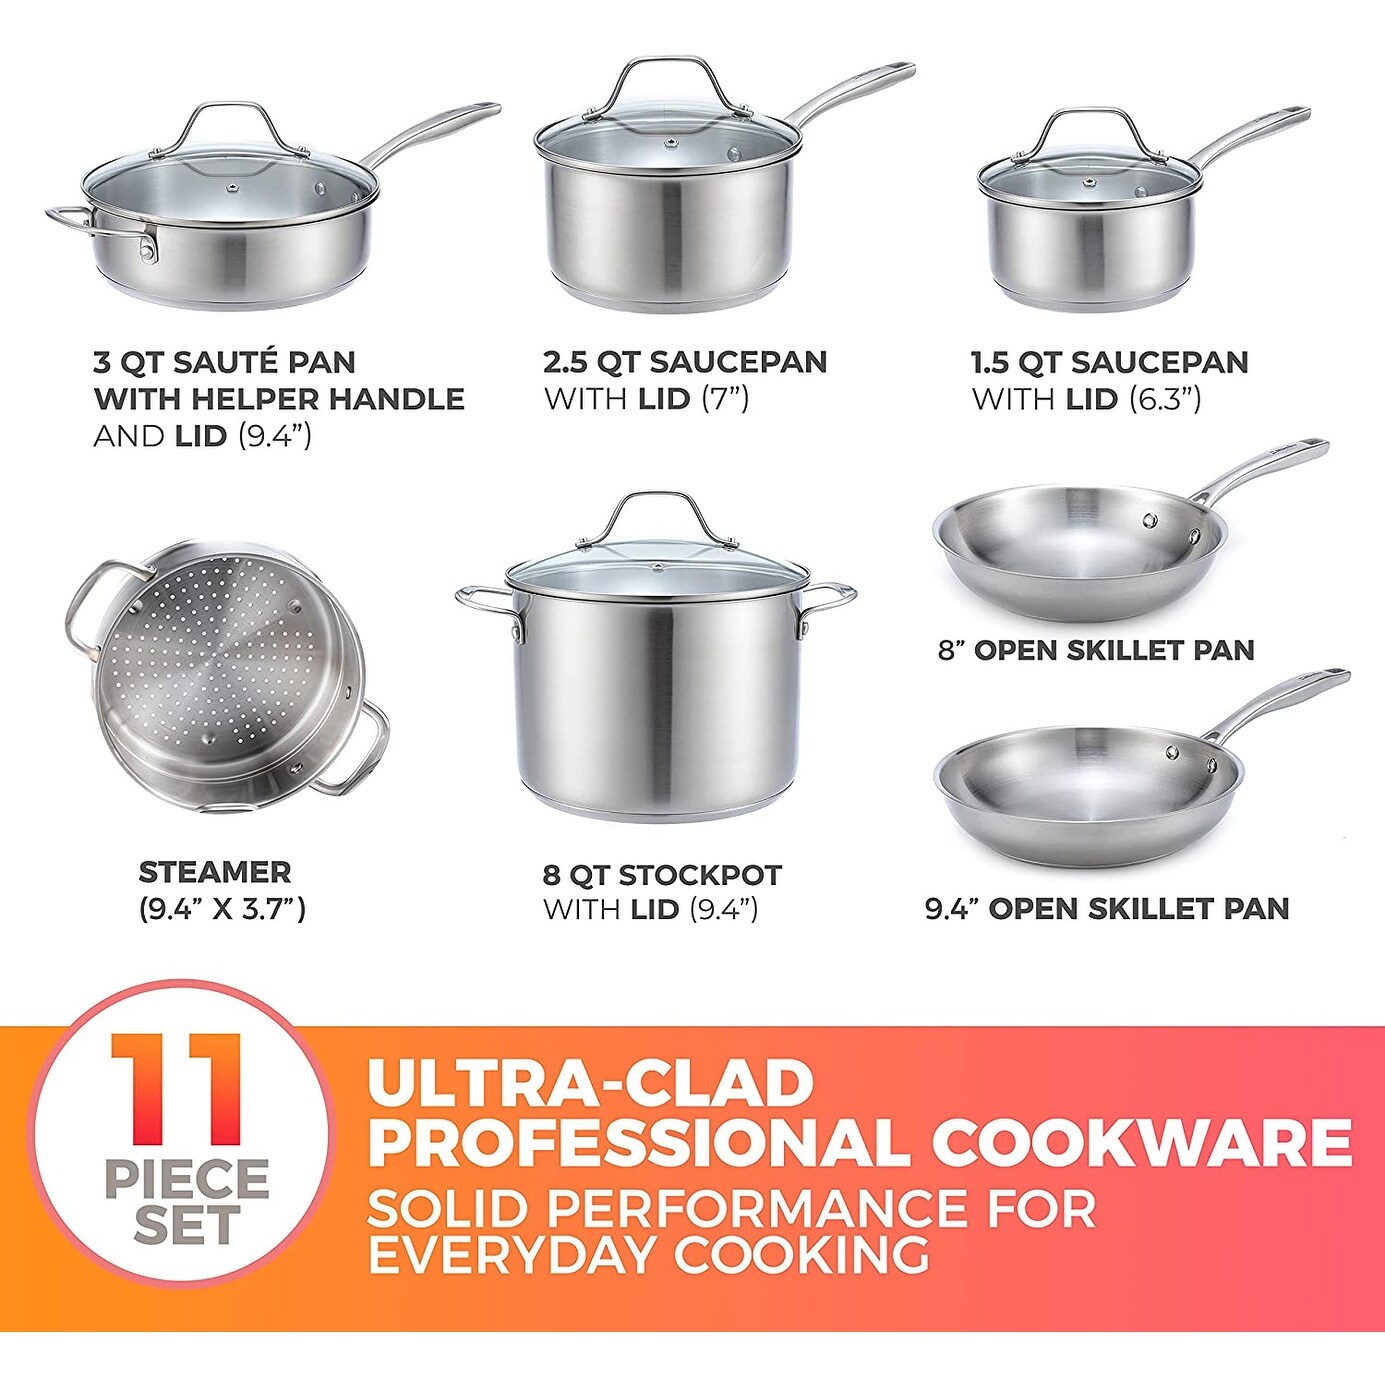 https://ak1.ostkcdn.com/images/products/is/images/direct/e2c37fca2e0586ebffb8a9895117d30b3ffc3242/Pots-and-Pans-Set-17-Piece%2C-Ultra-Clad-Pro-Stainless-Steel-Cookware-Set%2C-Ergonomic-and-EverCool-Stainless-Steel-Handle.jpg